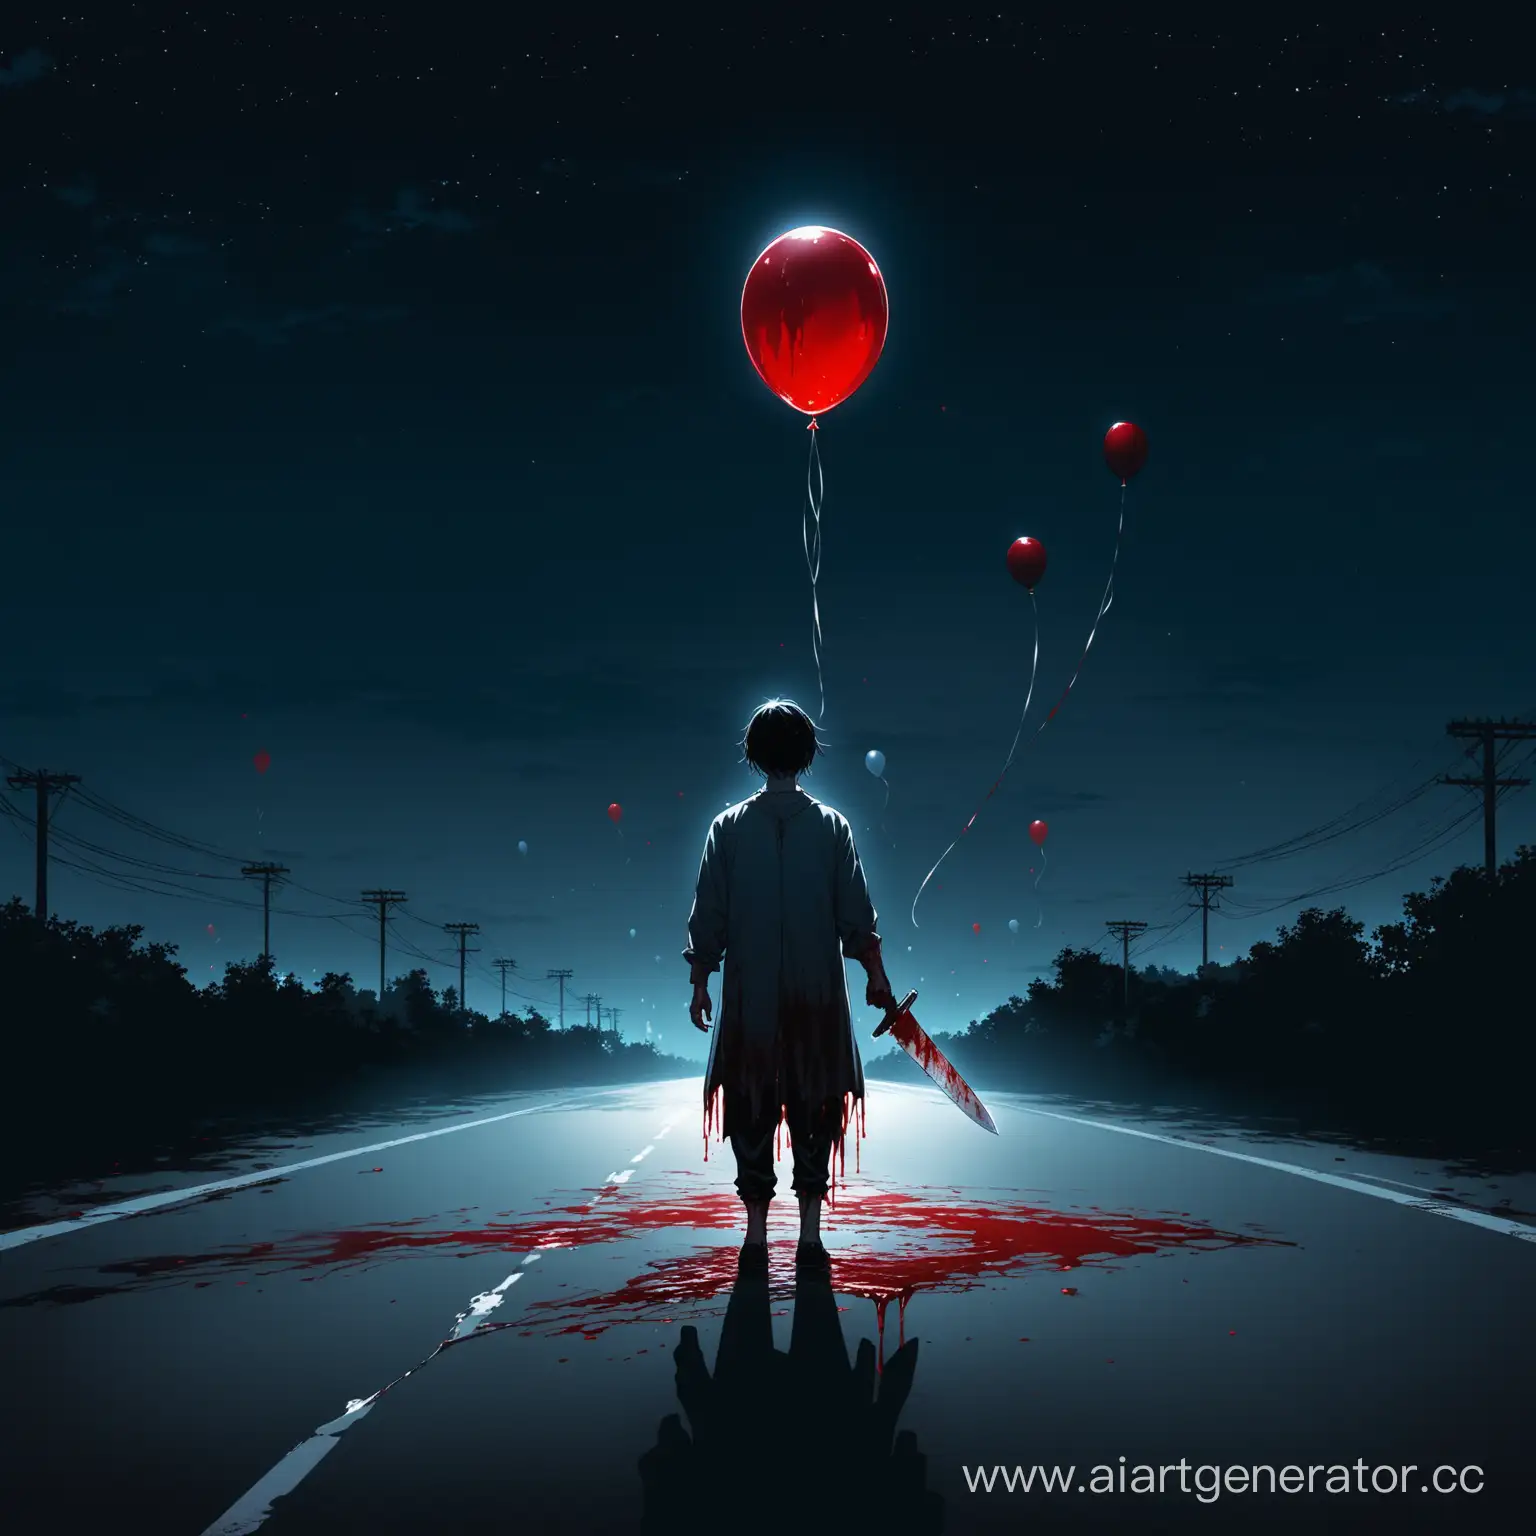 Sinister-Figure-Holding-Bloodied-Knife-and-Balloon-at-Night